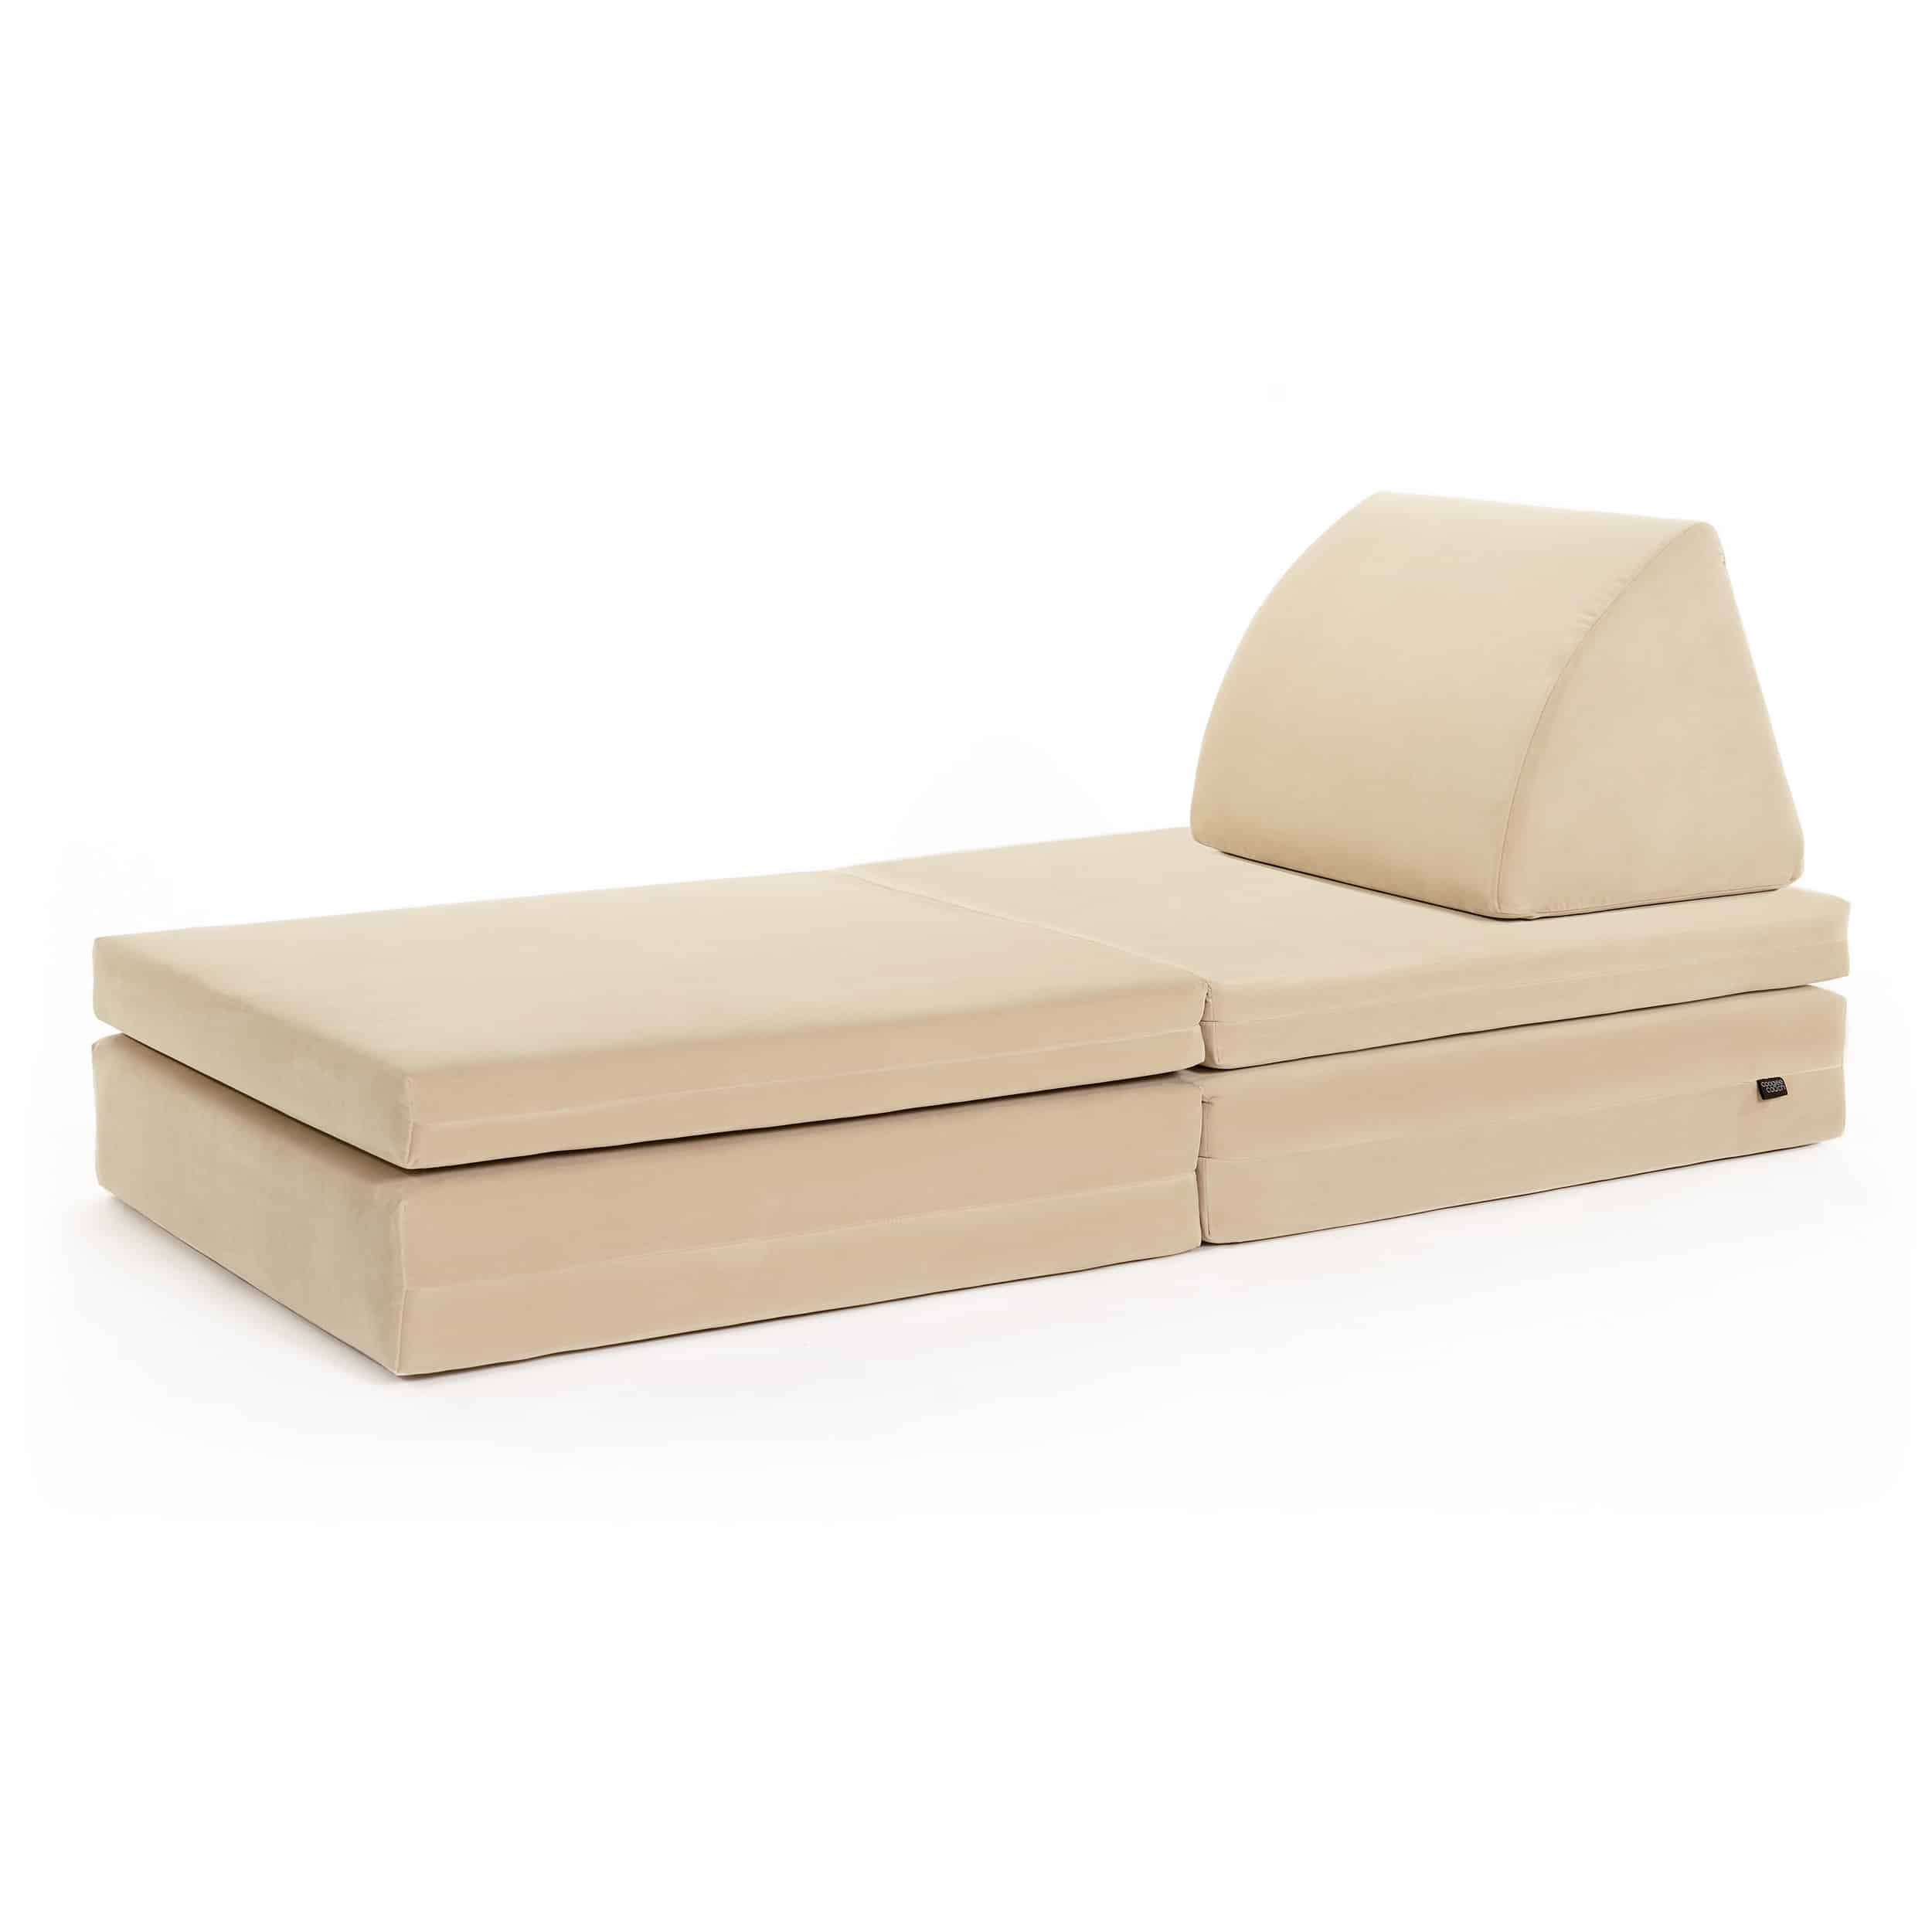 coogeecouch | kids sofa | series: chasingthesand | color: linen-white beige | view: front couch | made in Germany